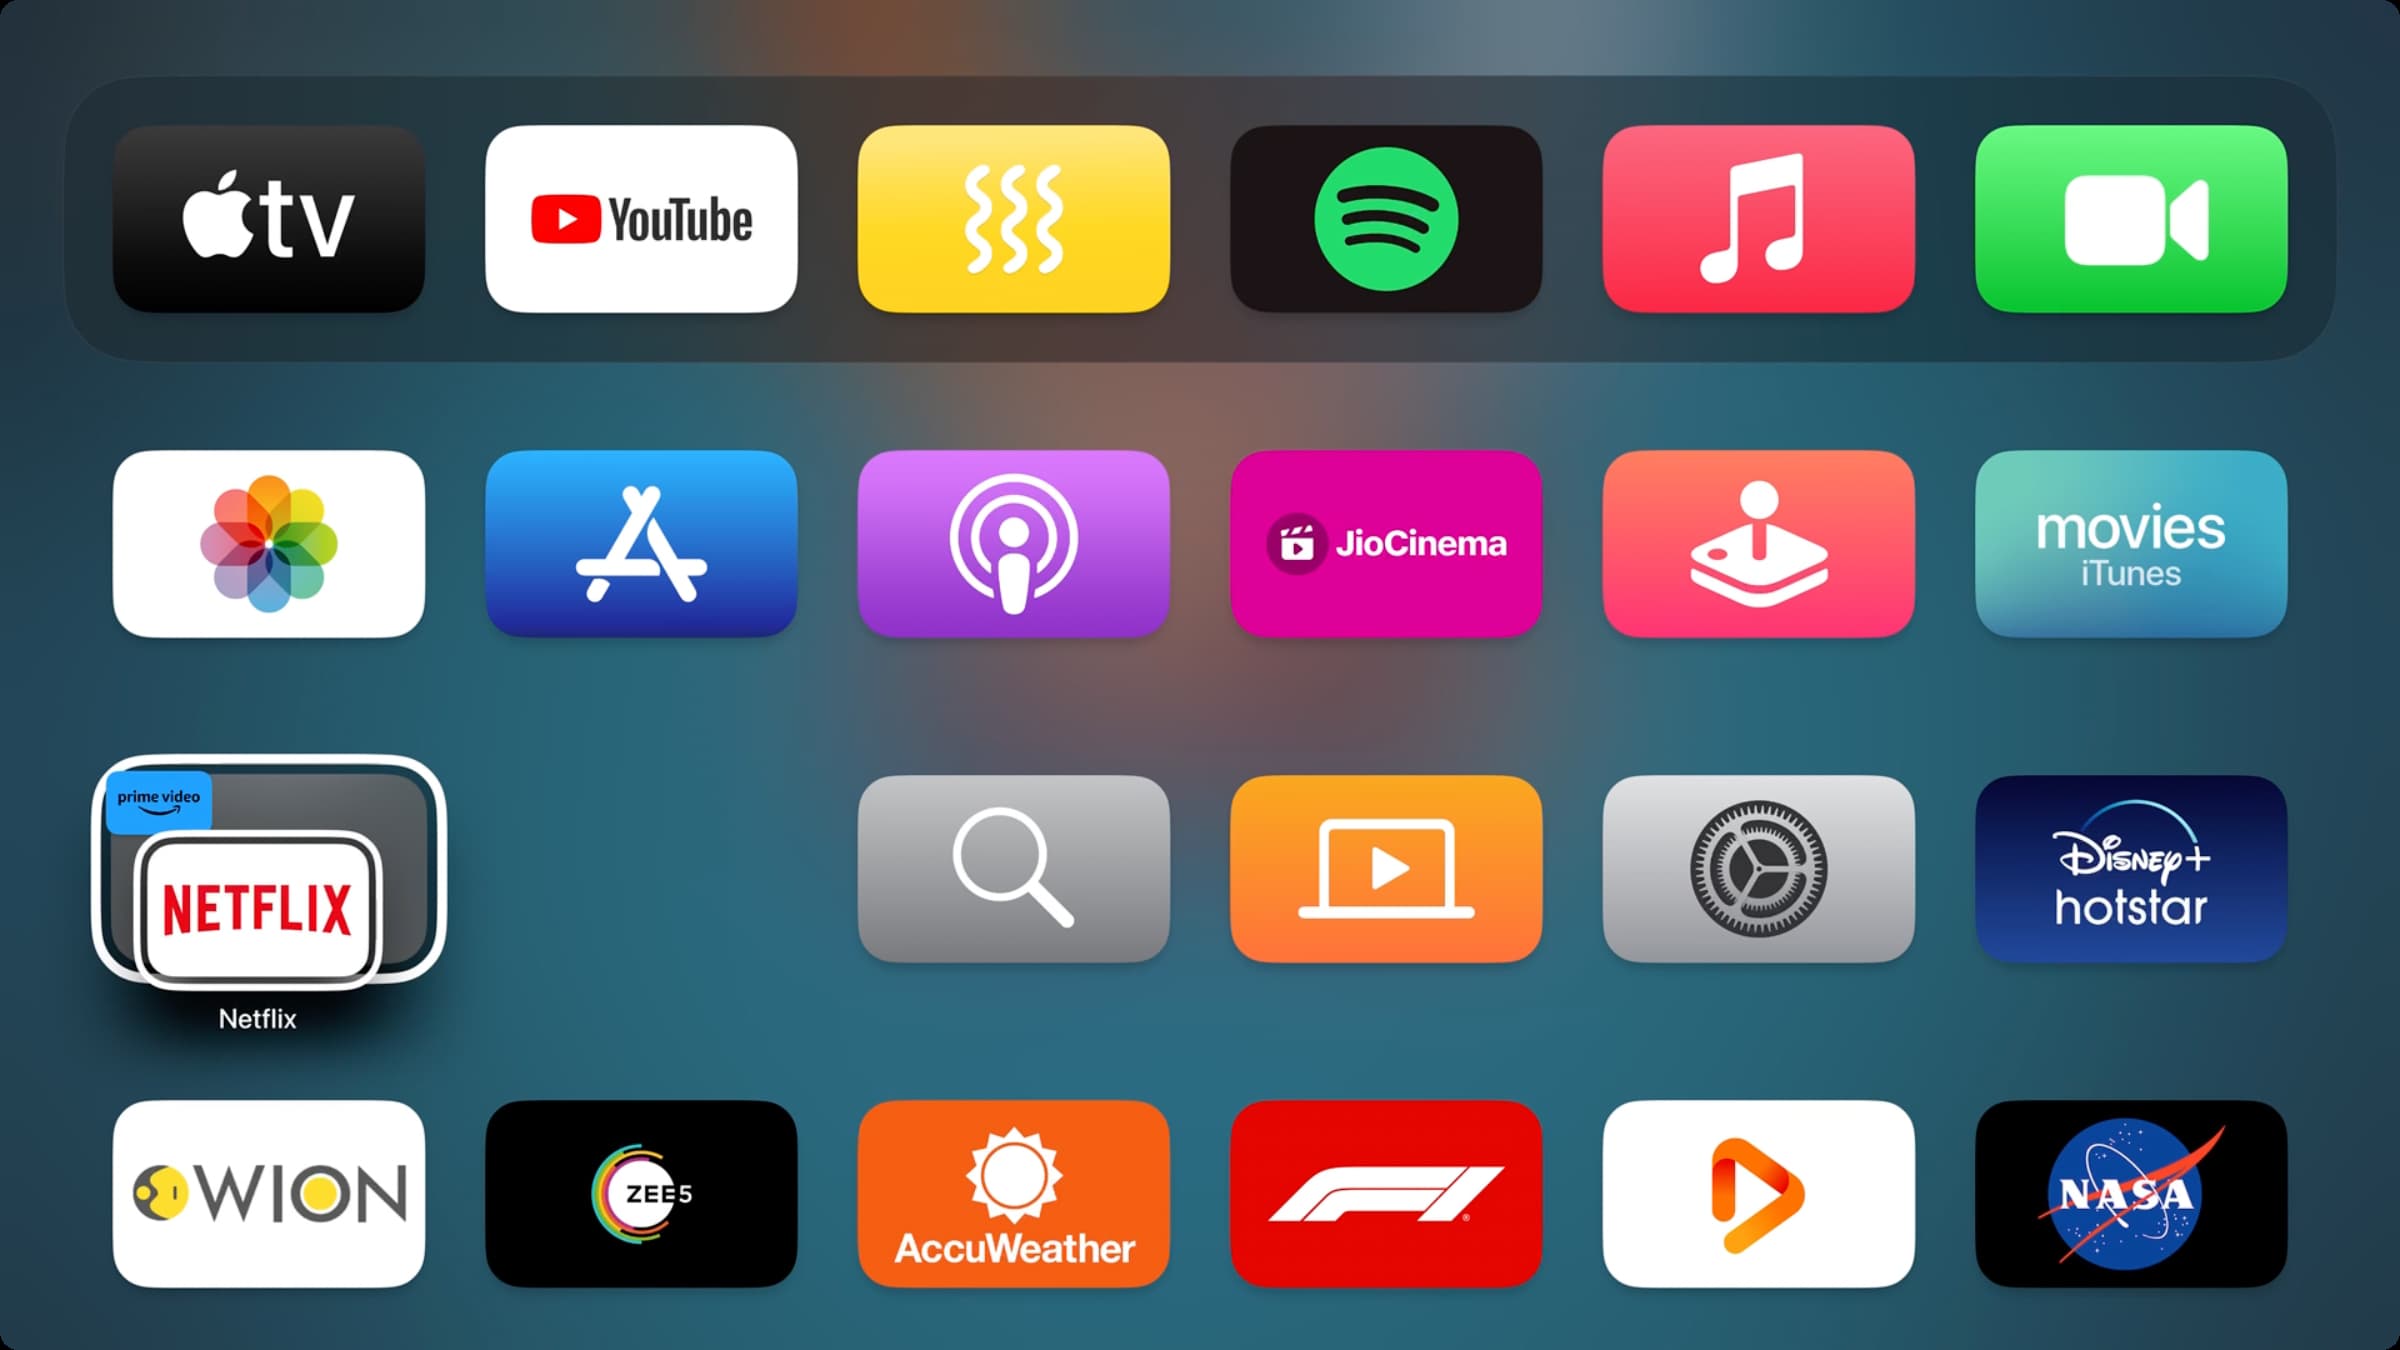 Drag one app over another app to create folder on Apple TV